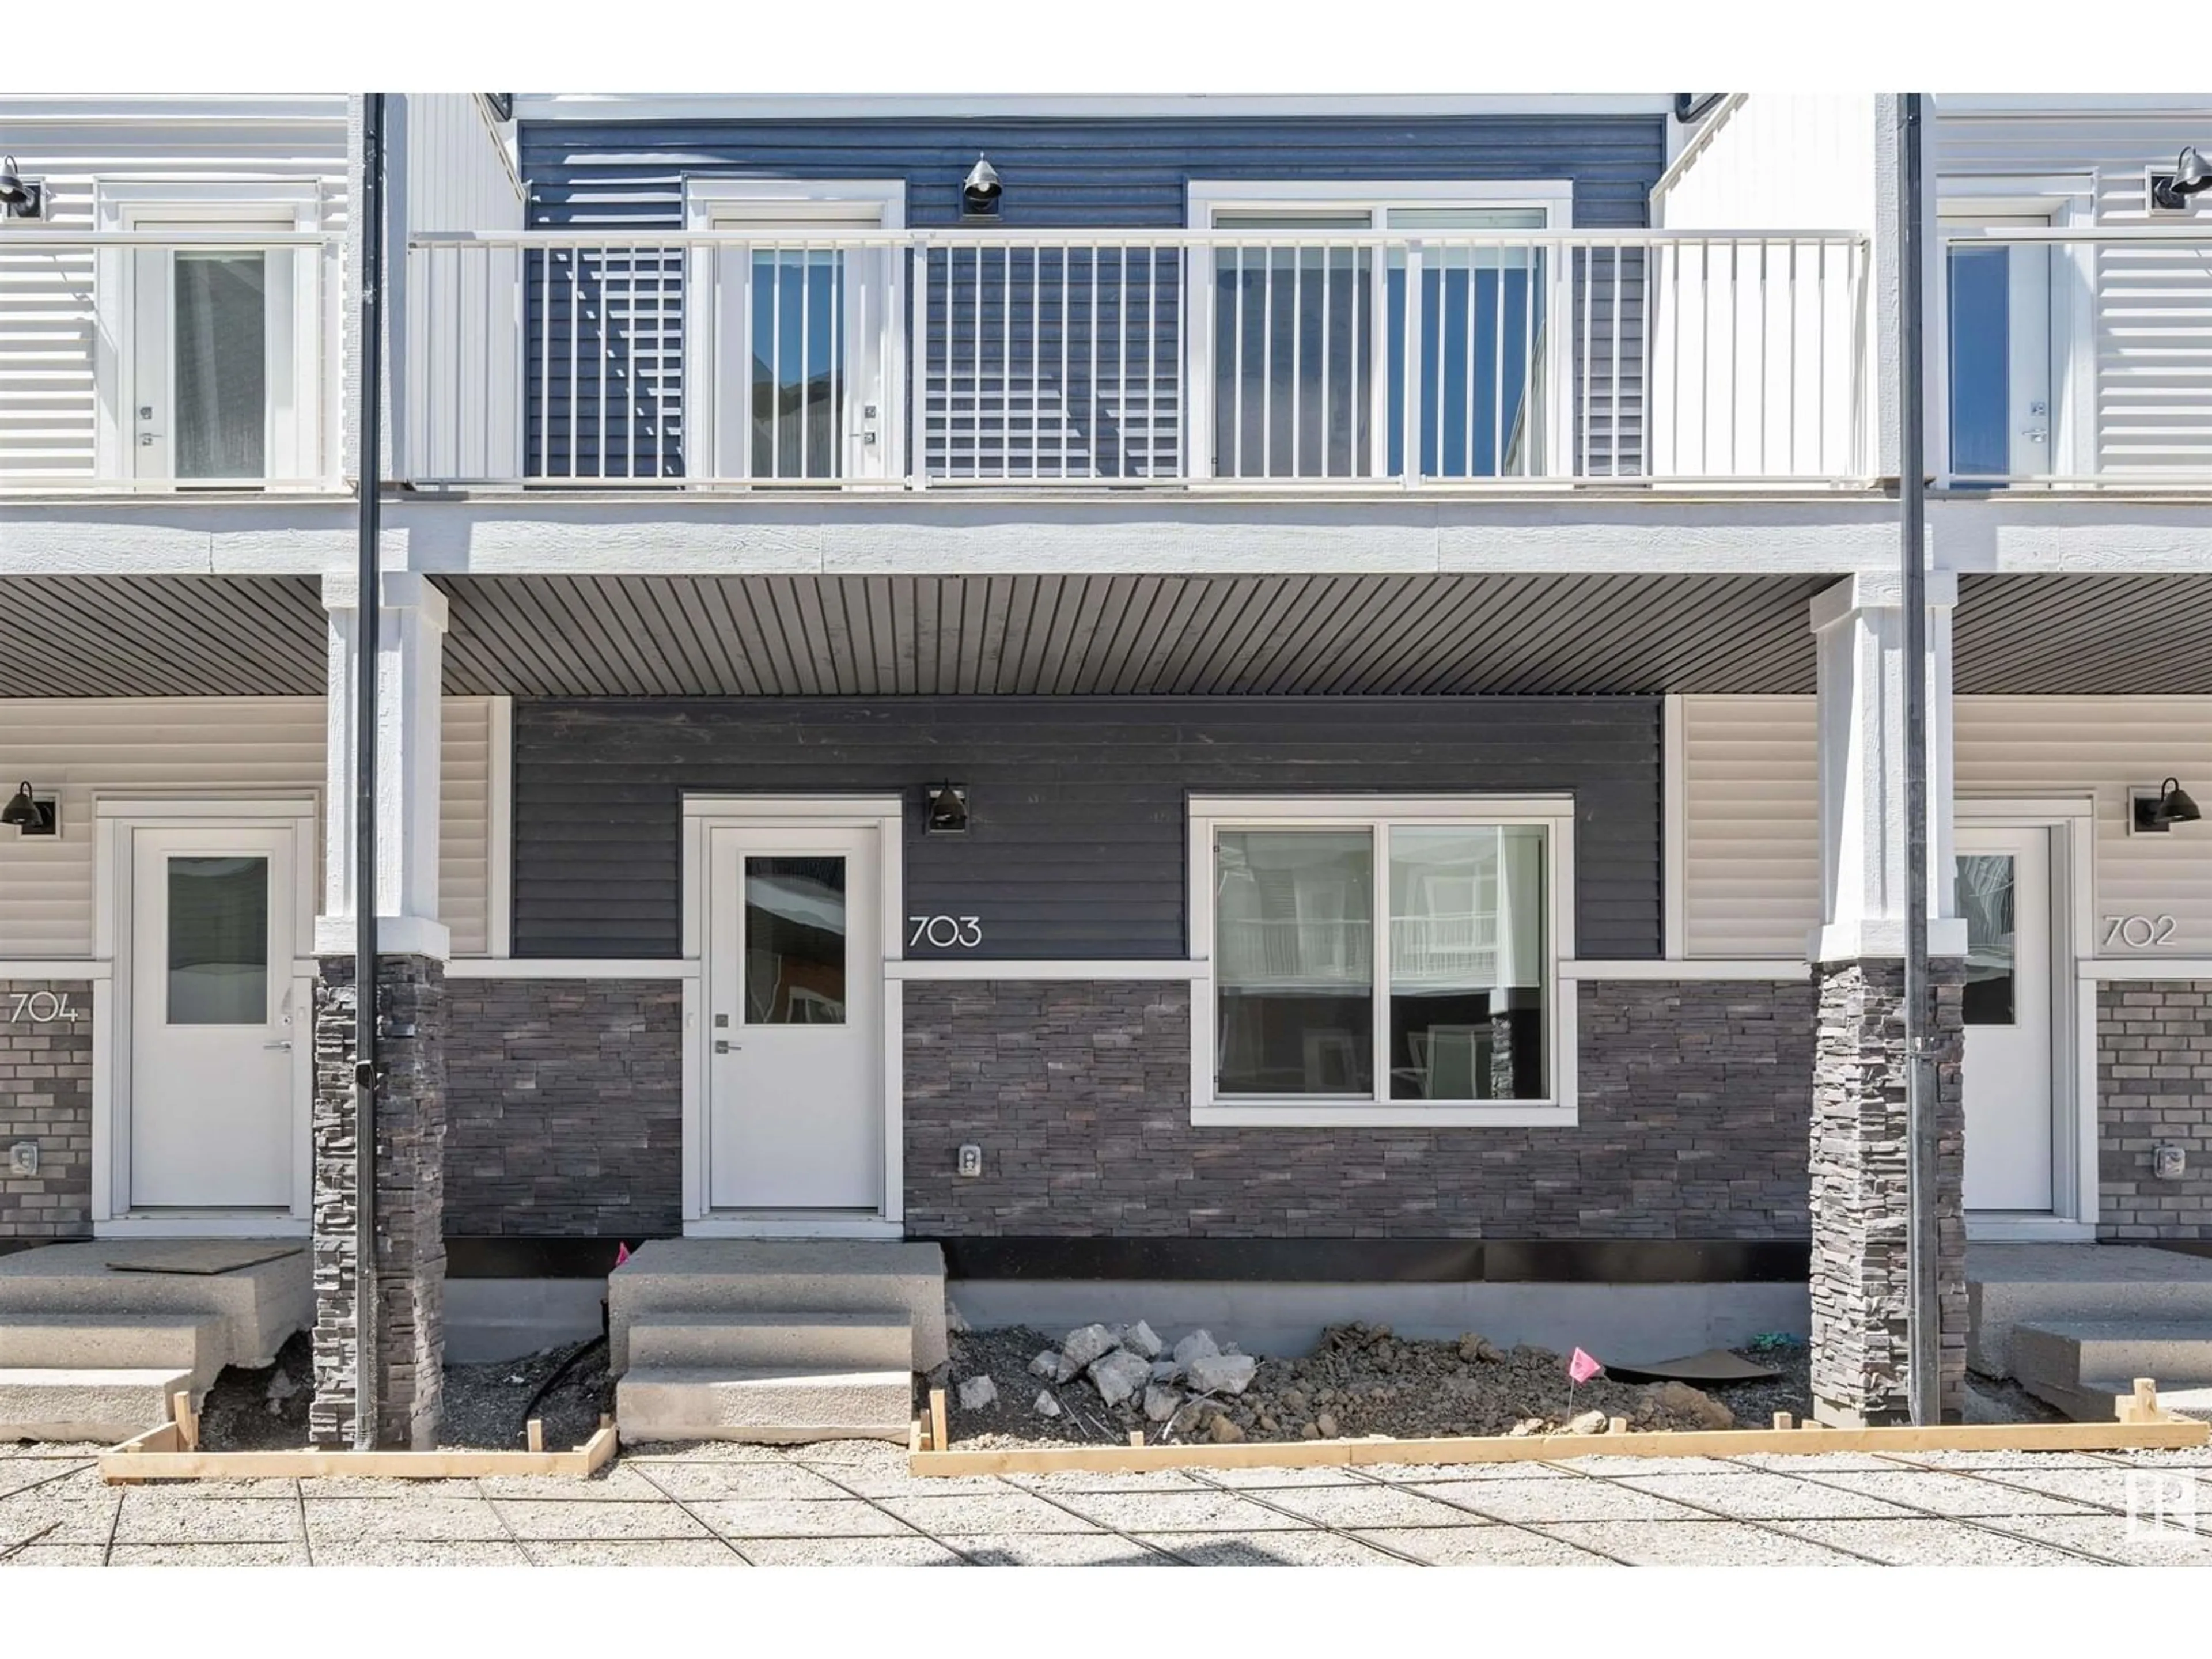 A pic from exterior of the house or condo for 703 335 Creekside BV, Calgary Alberta T2X5L1